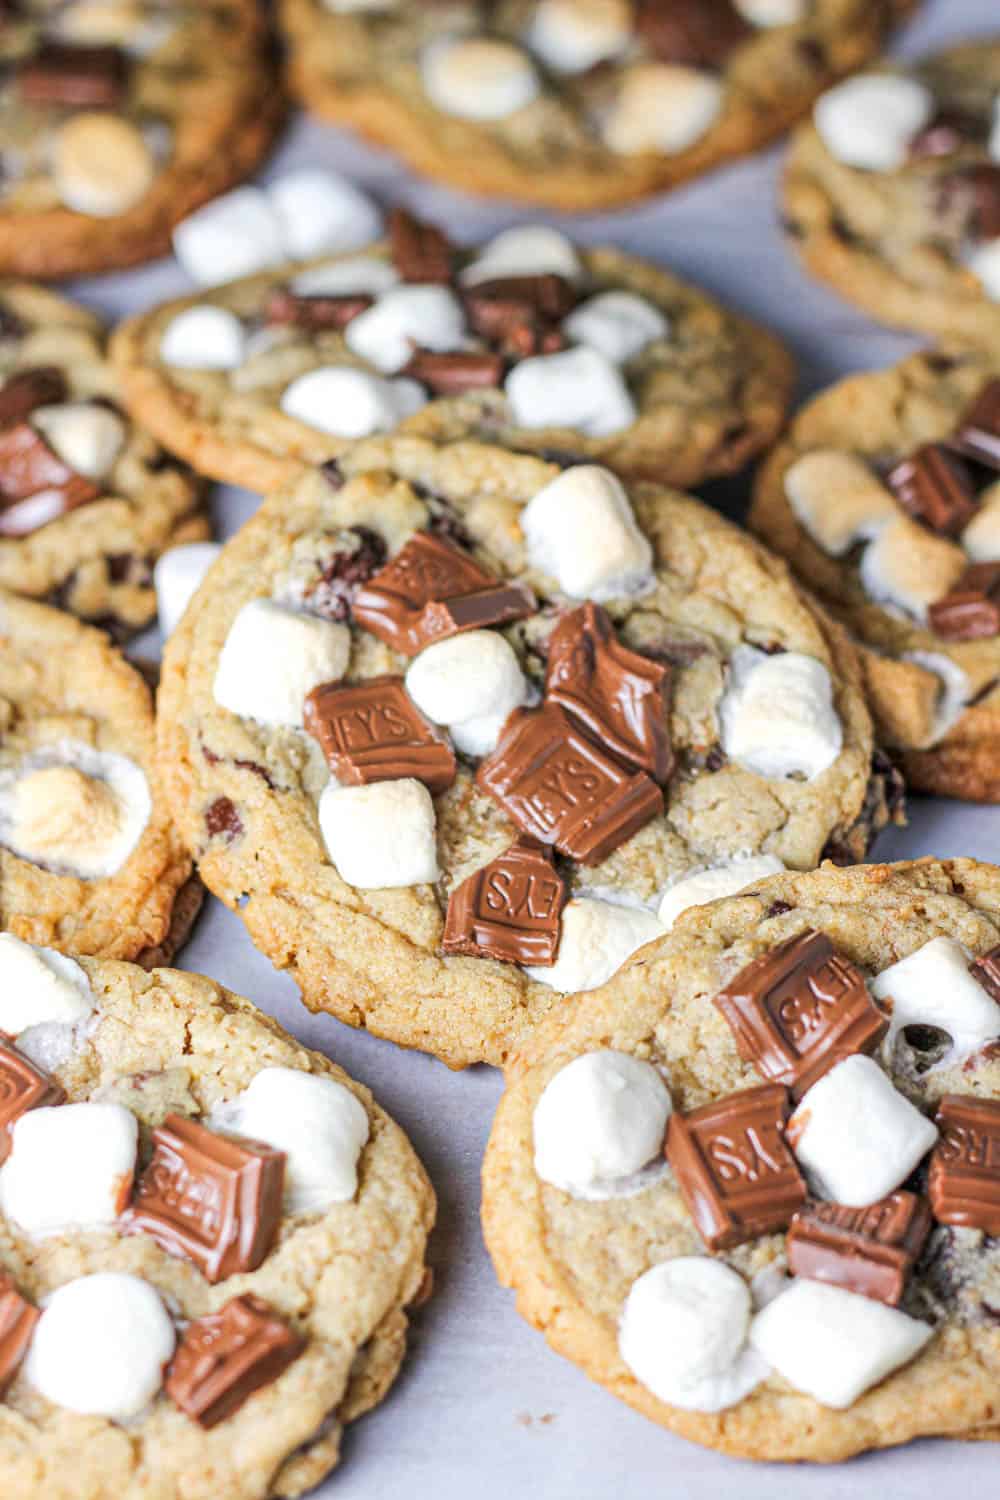 Gooey S’more Chocolate Chip Cookies